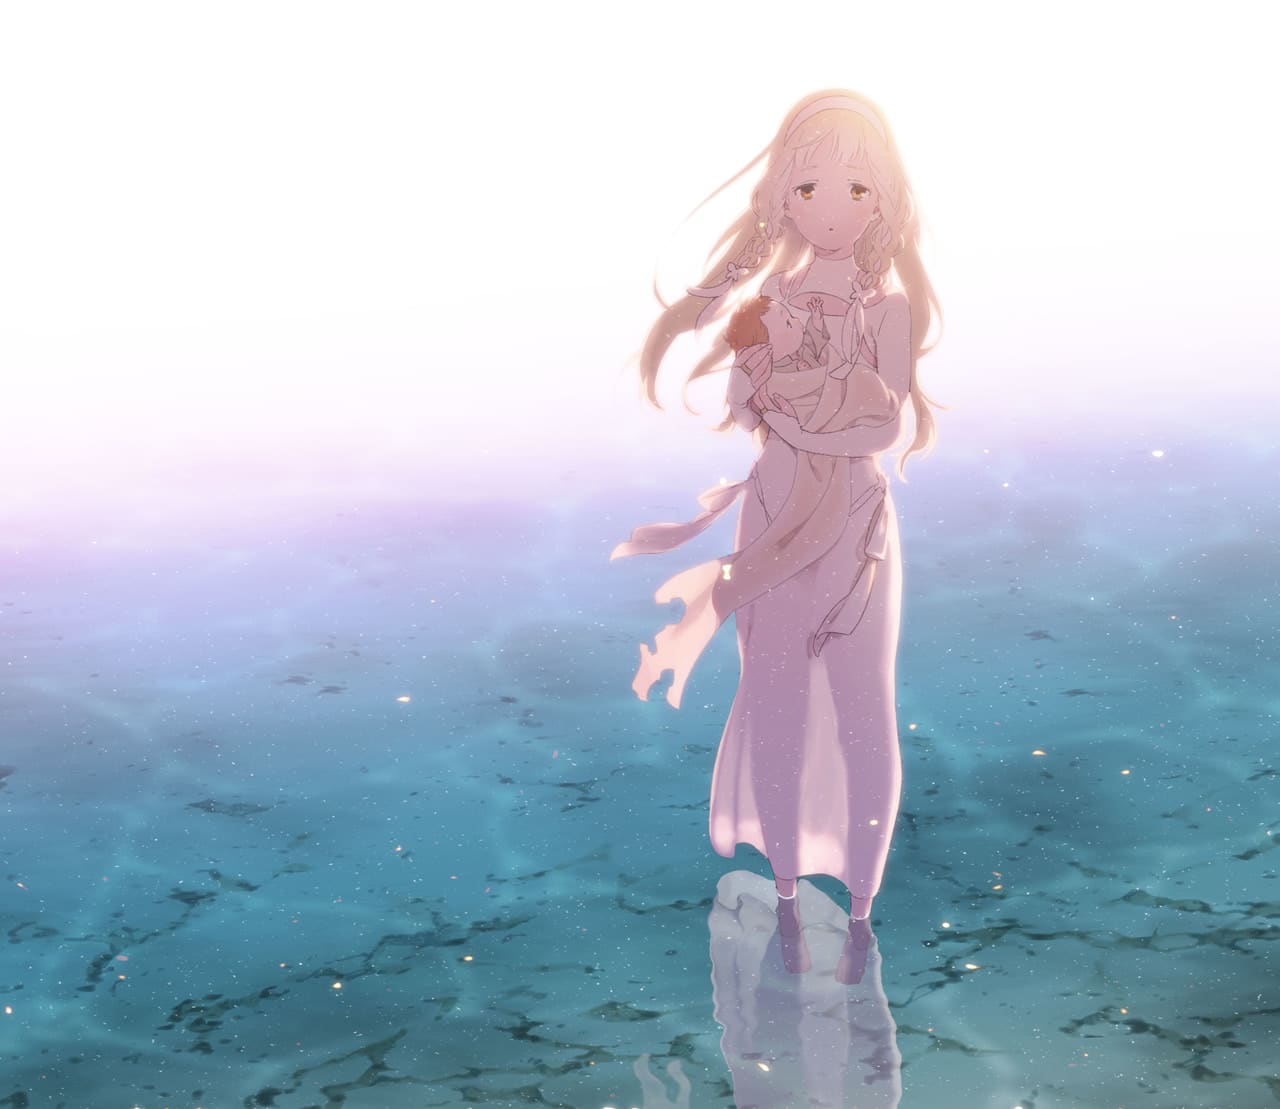 image about Maquia: When The Promised Flower Blooms. See more about anime, sayonara no asa and anime movie